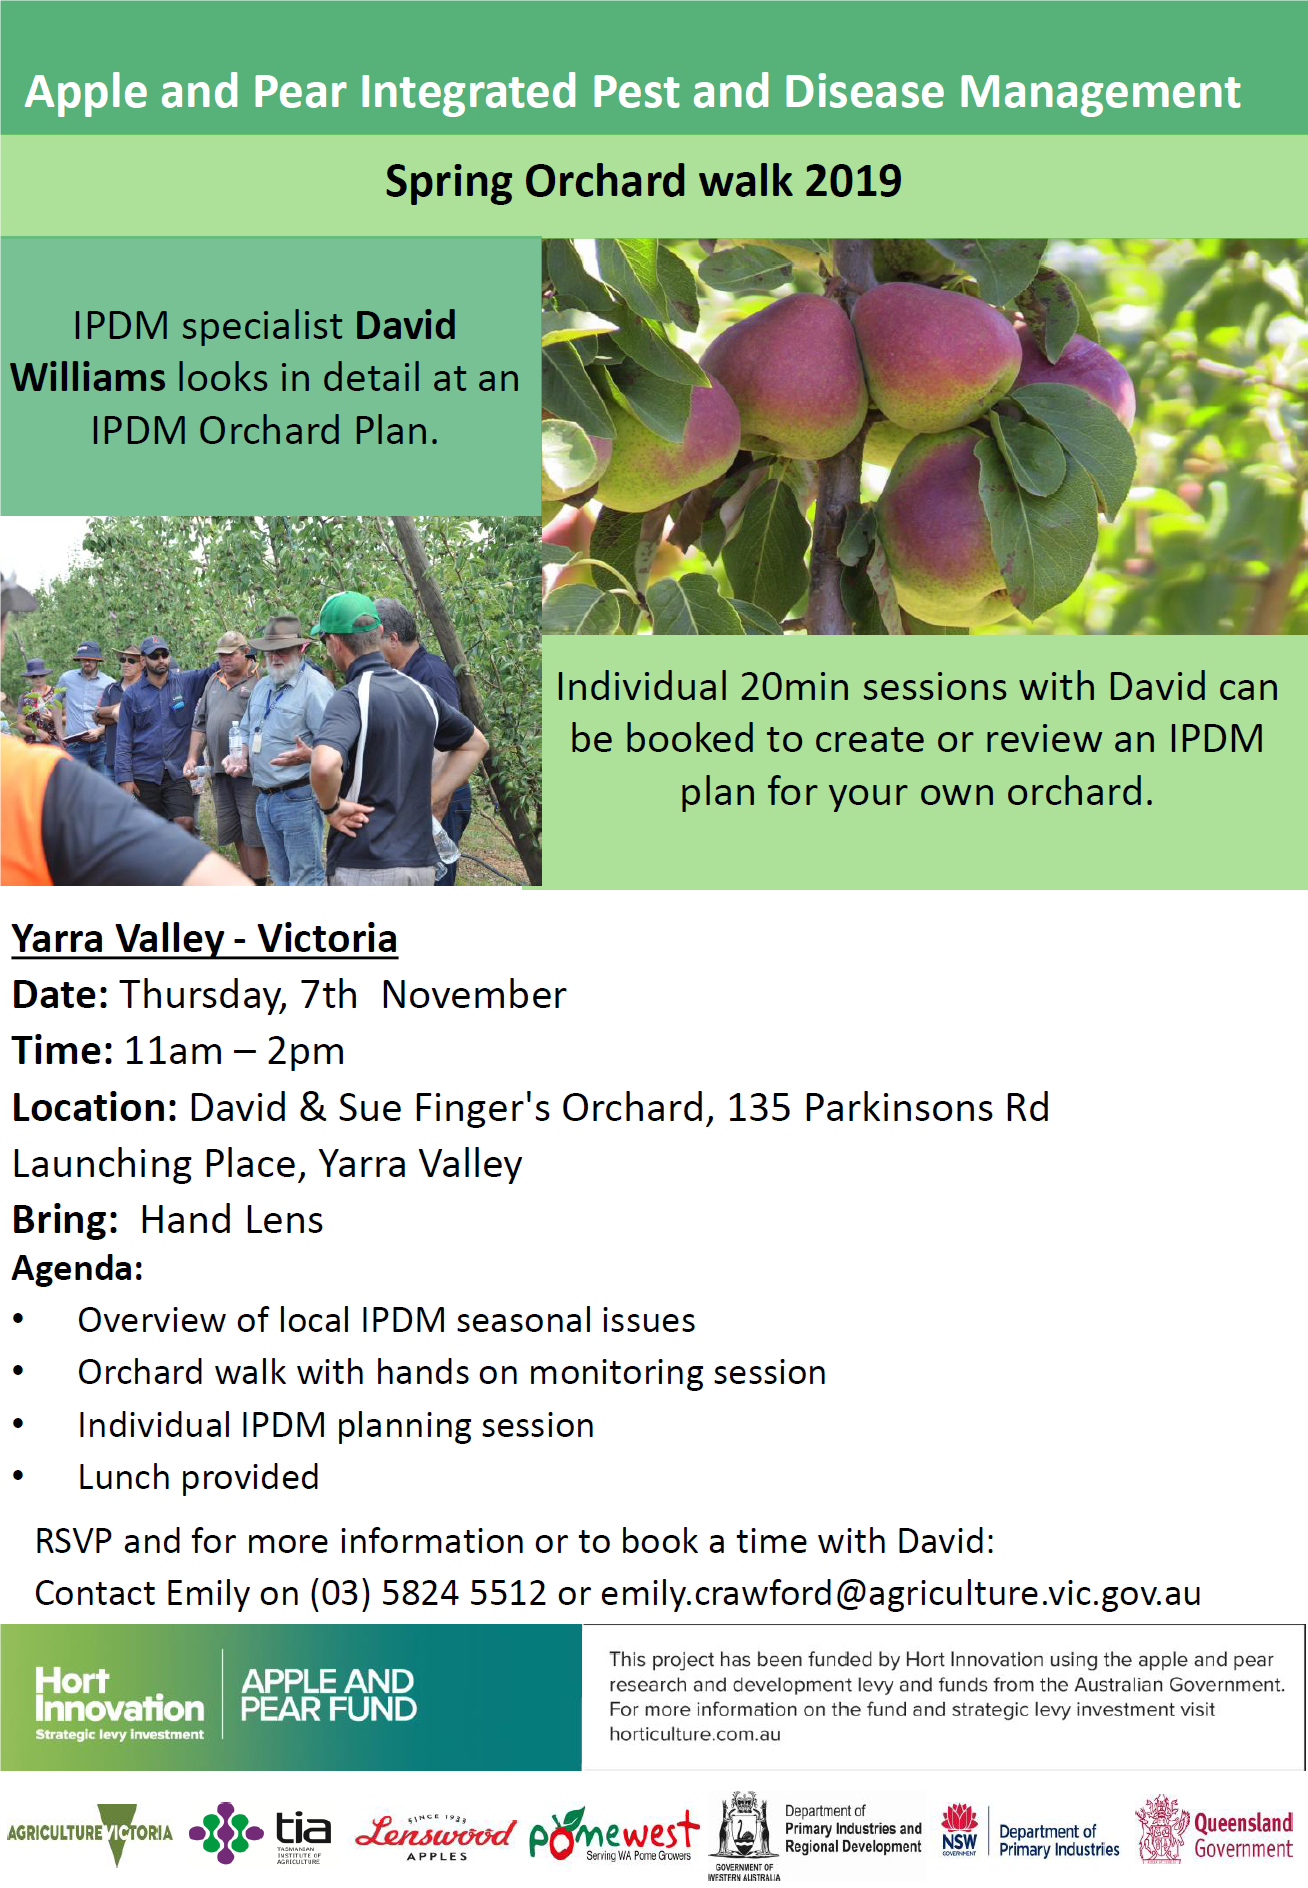 Ag Vic Pest and Disease flyer